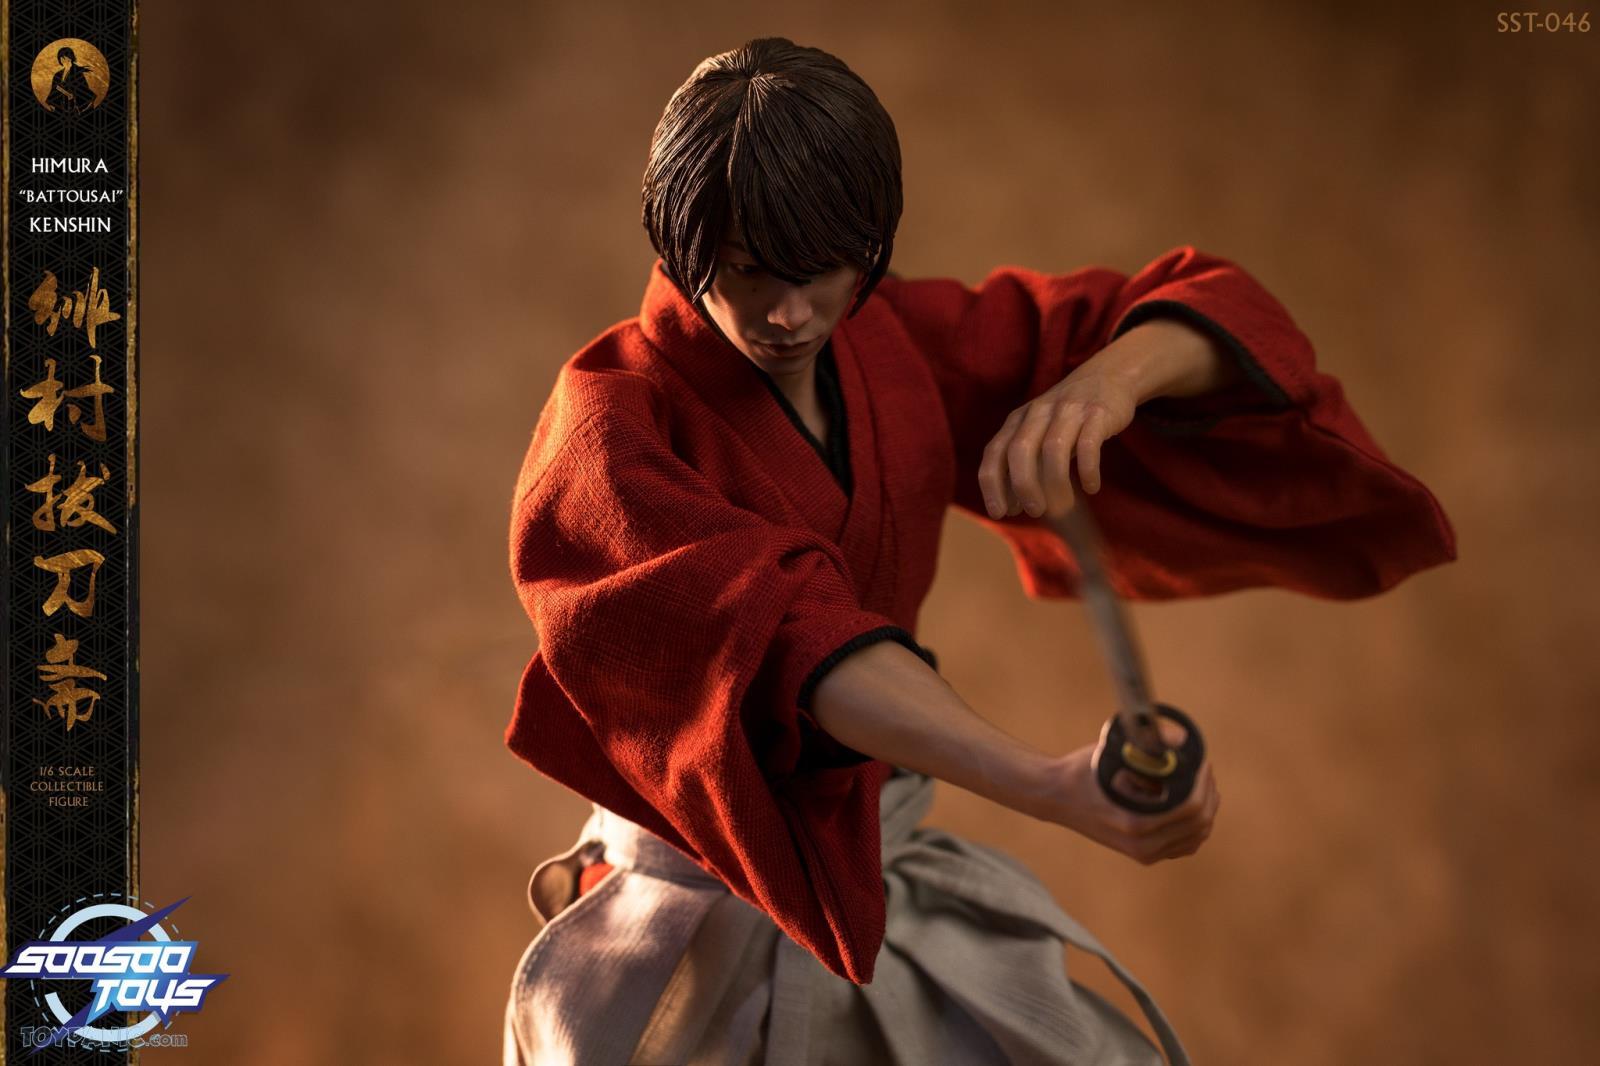 kenshin - NEW PRODUCT: 1/6 scale Rurouni Kenshin Collectible Figure from SooSooToys 712202251230PM_8826835